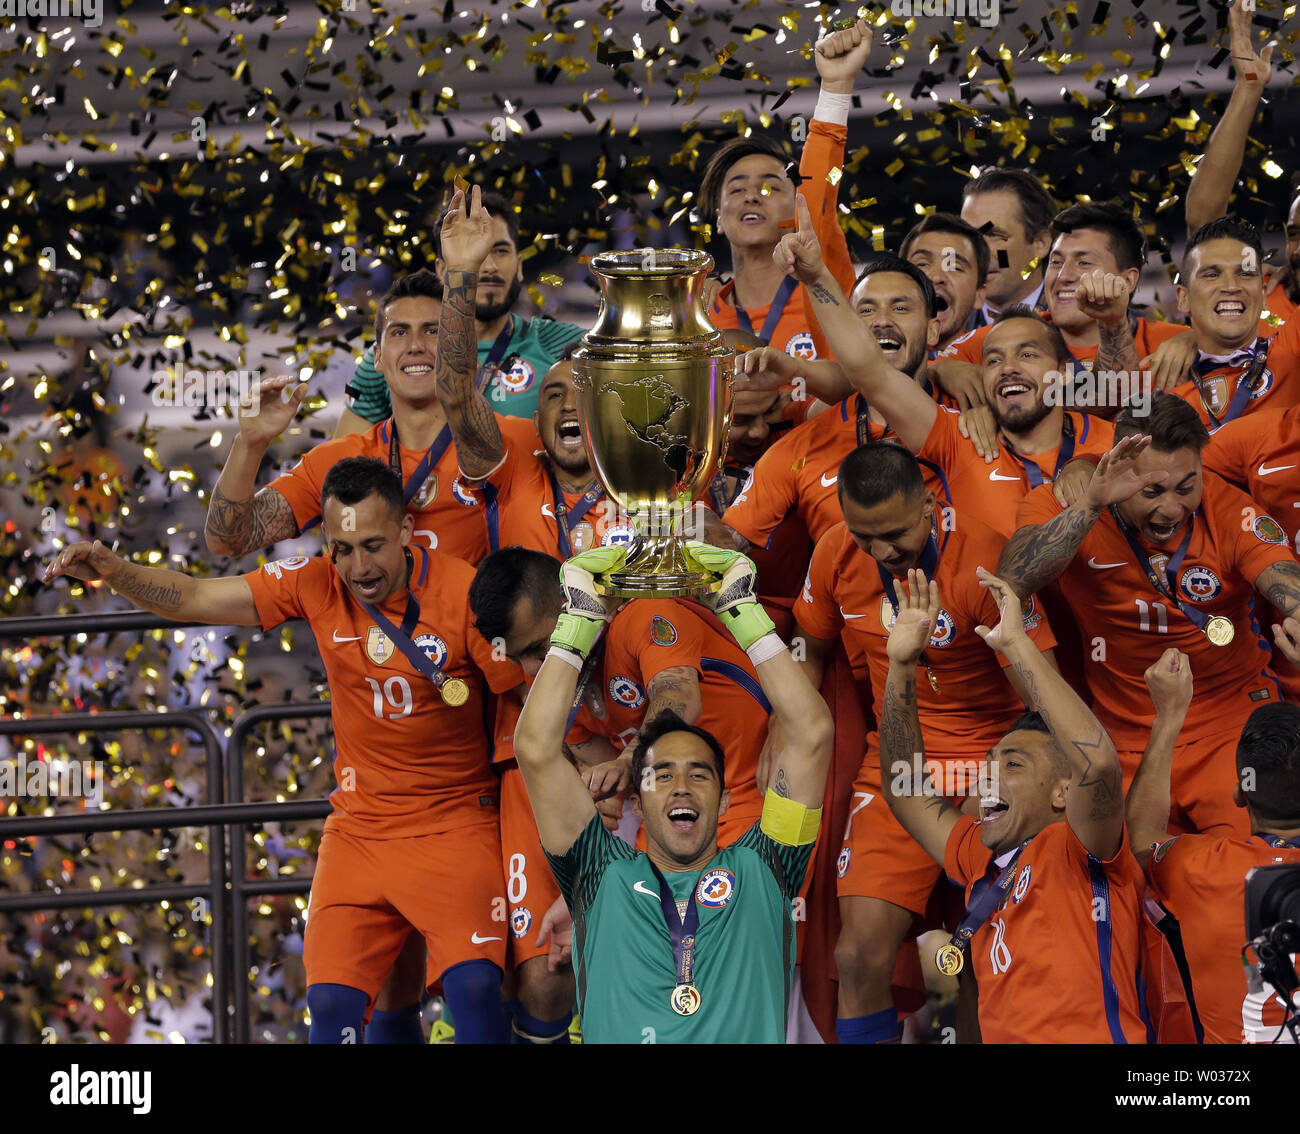 Chile goalkeeper Claudio Bravo (1) holds the up the cup as his teammates celebrate after beating Argentina in the penalty kicks phase at the Copa America Centenario USA 2016 Finals at MetLife Stadium in East Rutherford, New Jersey, on June 26, 2016. Photo by Ray Stubblebine/UPI Stock Photo